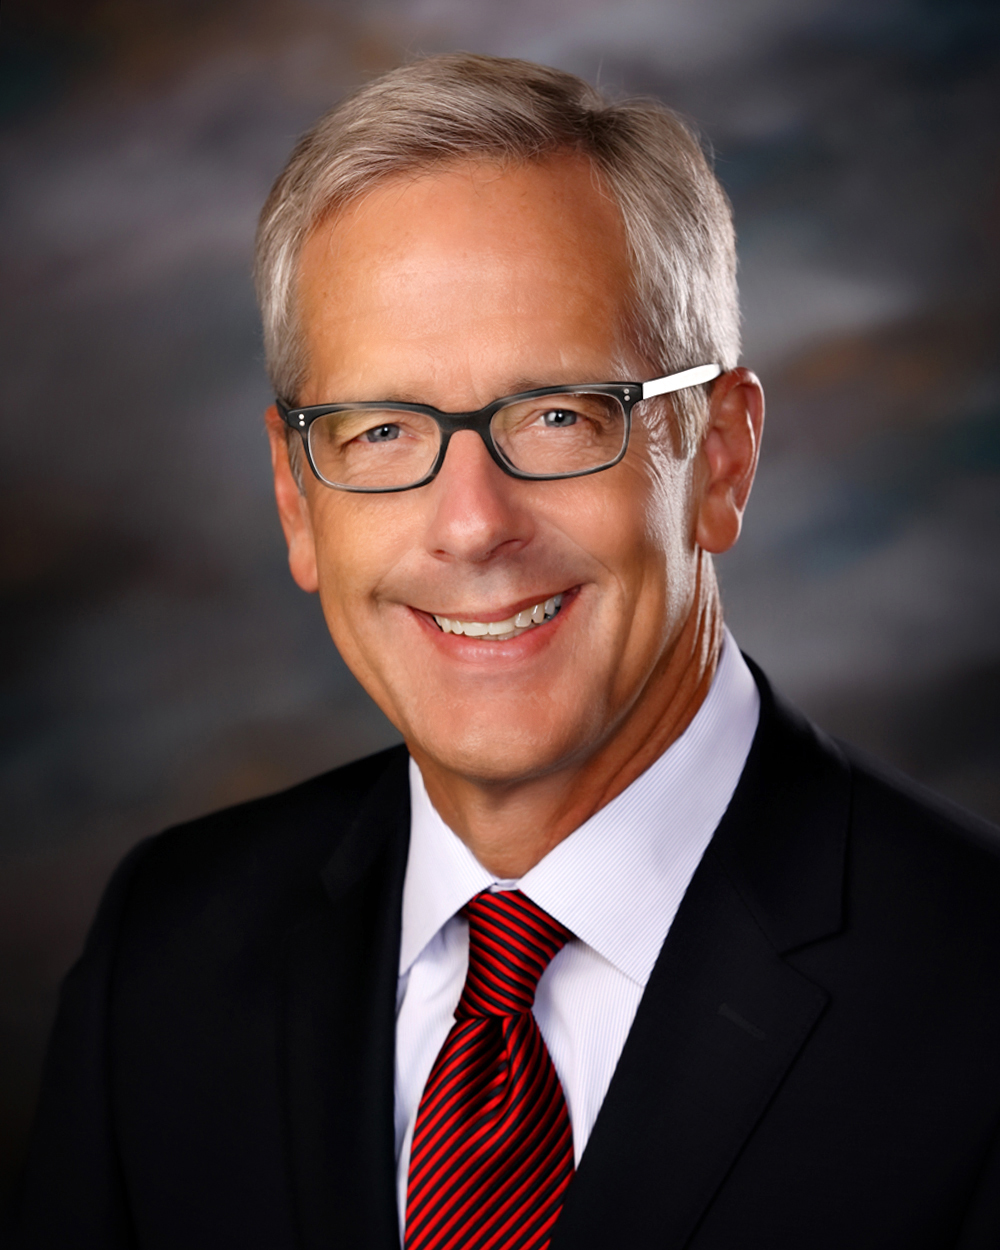 Iowa Bankers Association (IBA) president and CEO John Sorensen is retiring after 38 years with the company.